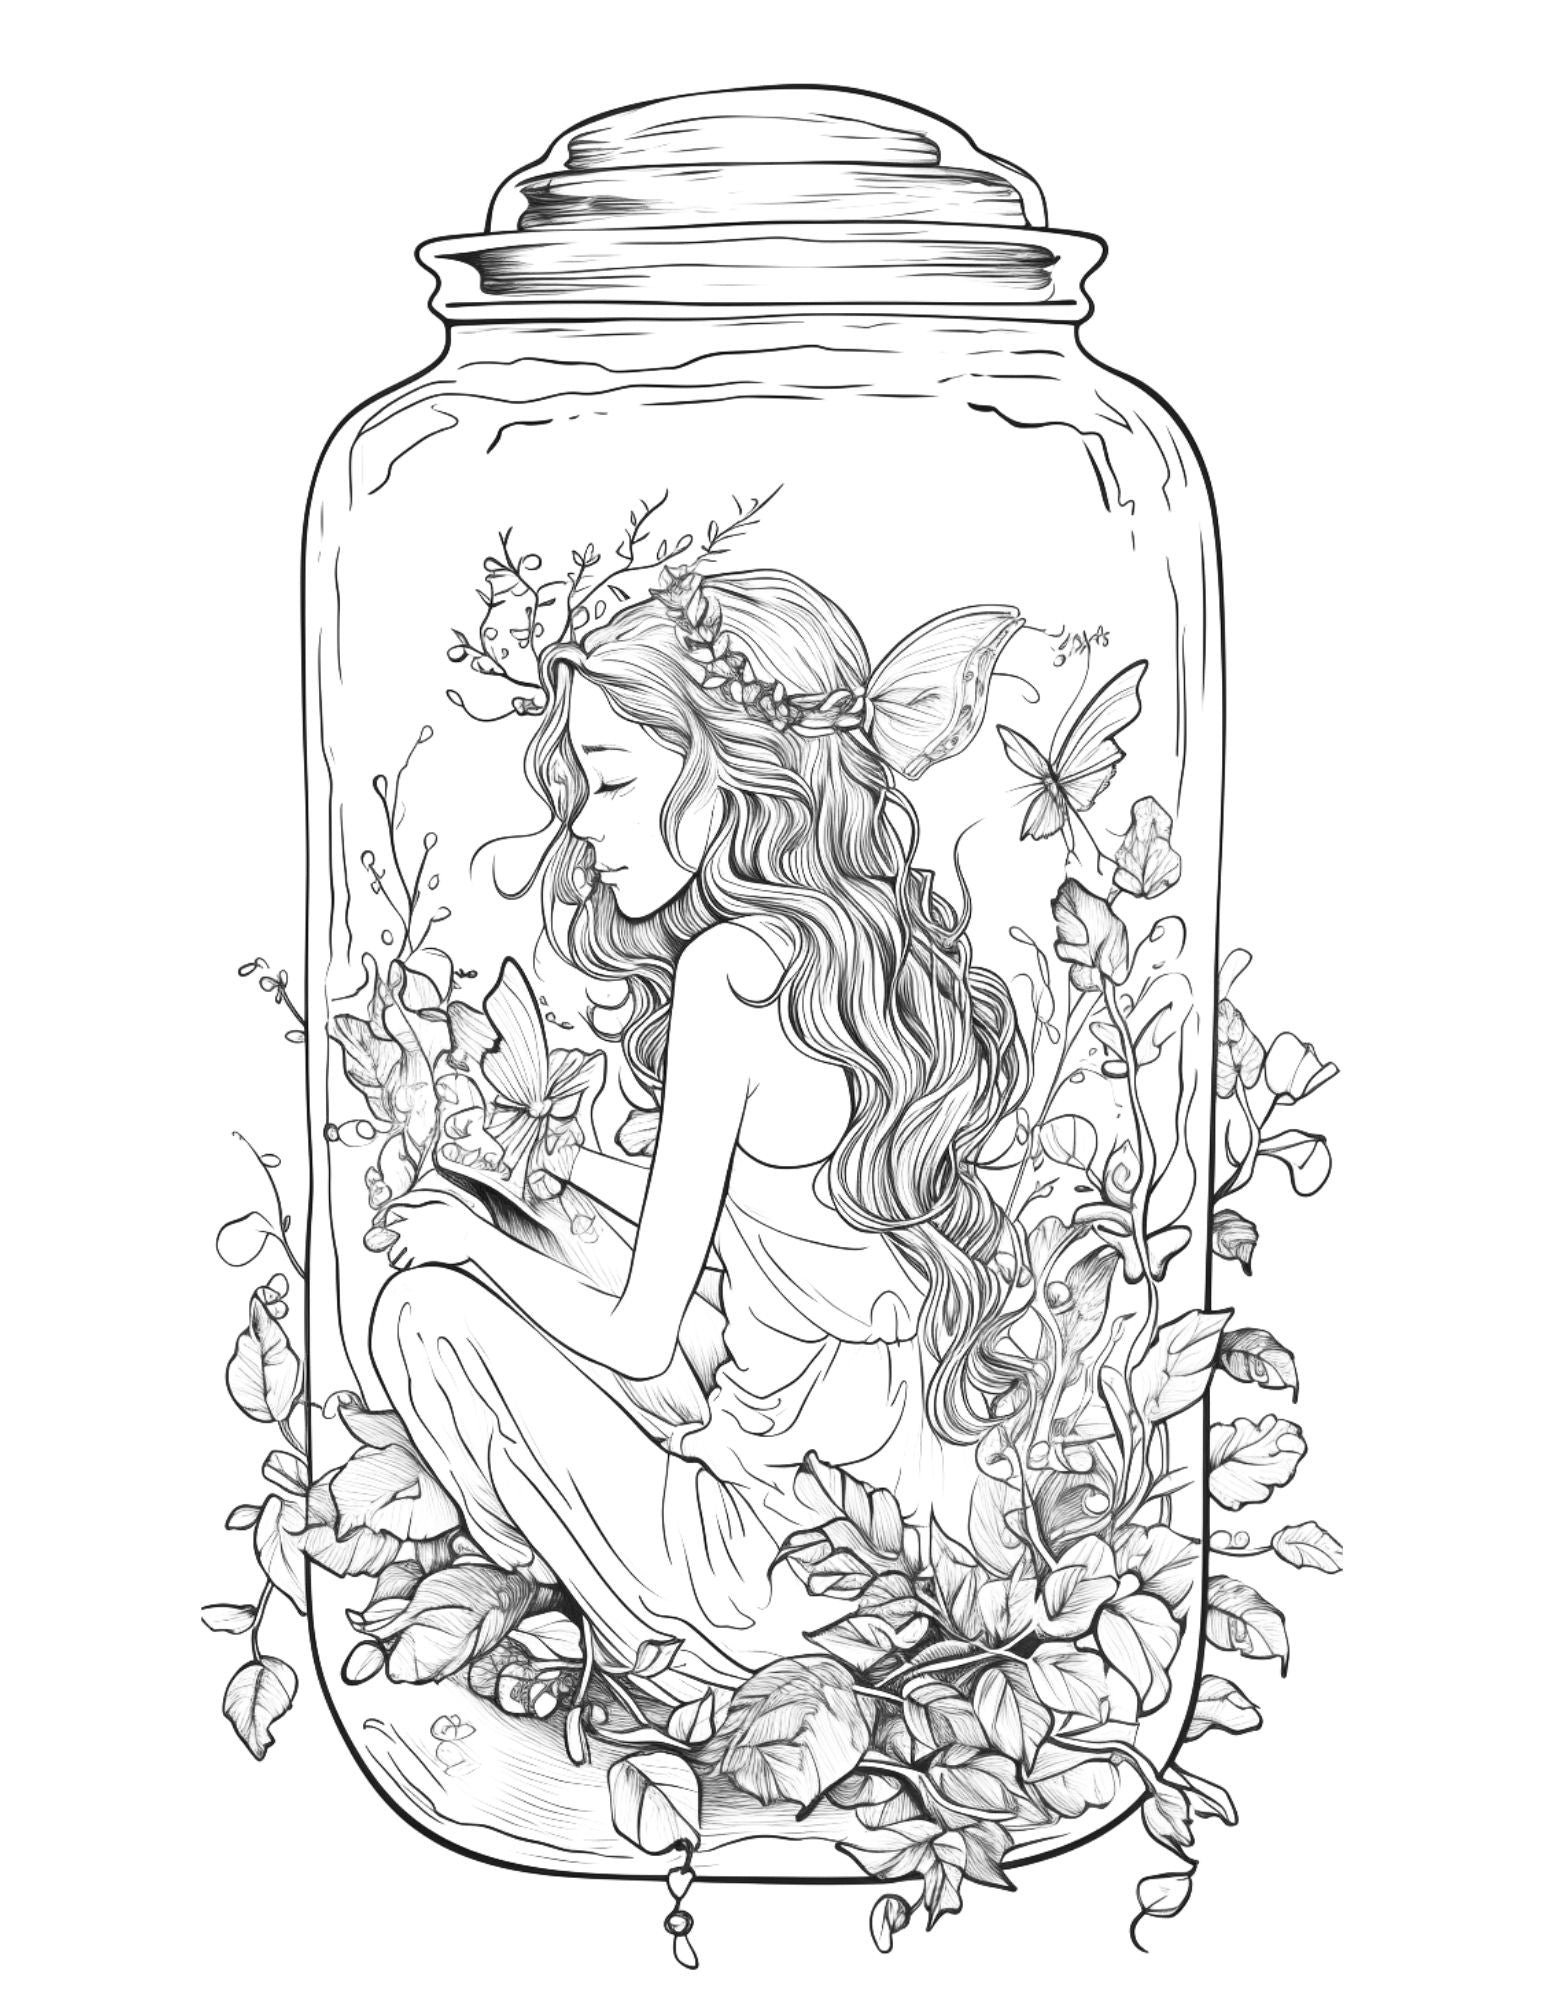 Fairy Girl in Jar Coloring Pages for Adults, Free Printable PDF Instant Download - raspiee